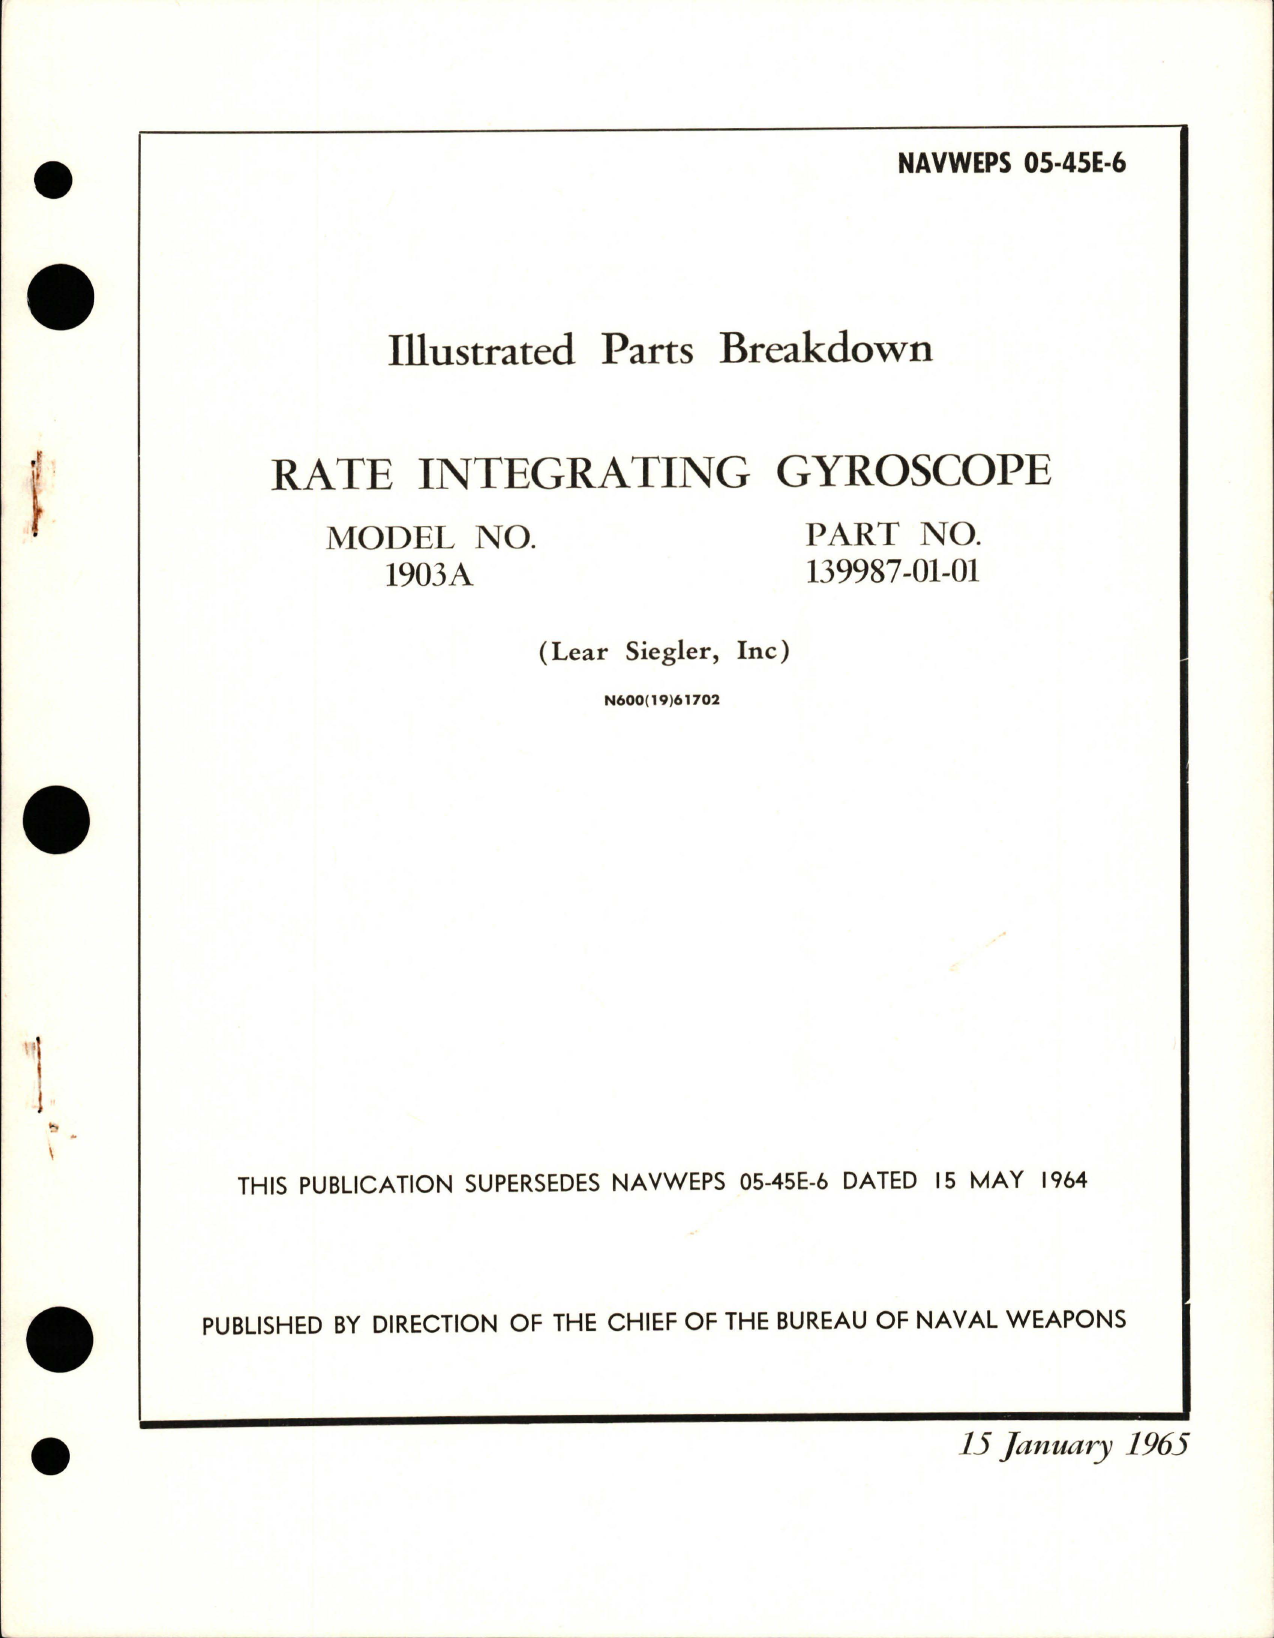 Sample page 1 from AirCorps Library document: Illustrated Parts Breakdown for Rate Integrating Gyroscope - Model 1903A